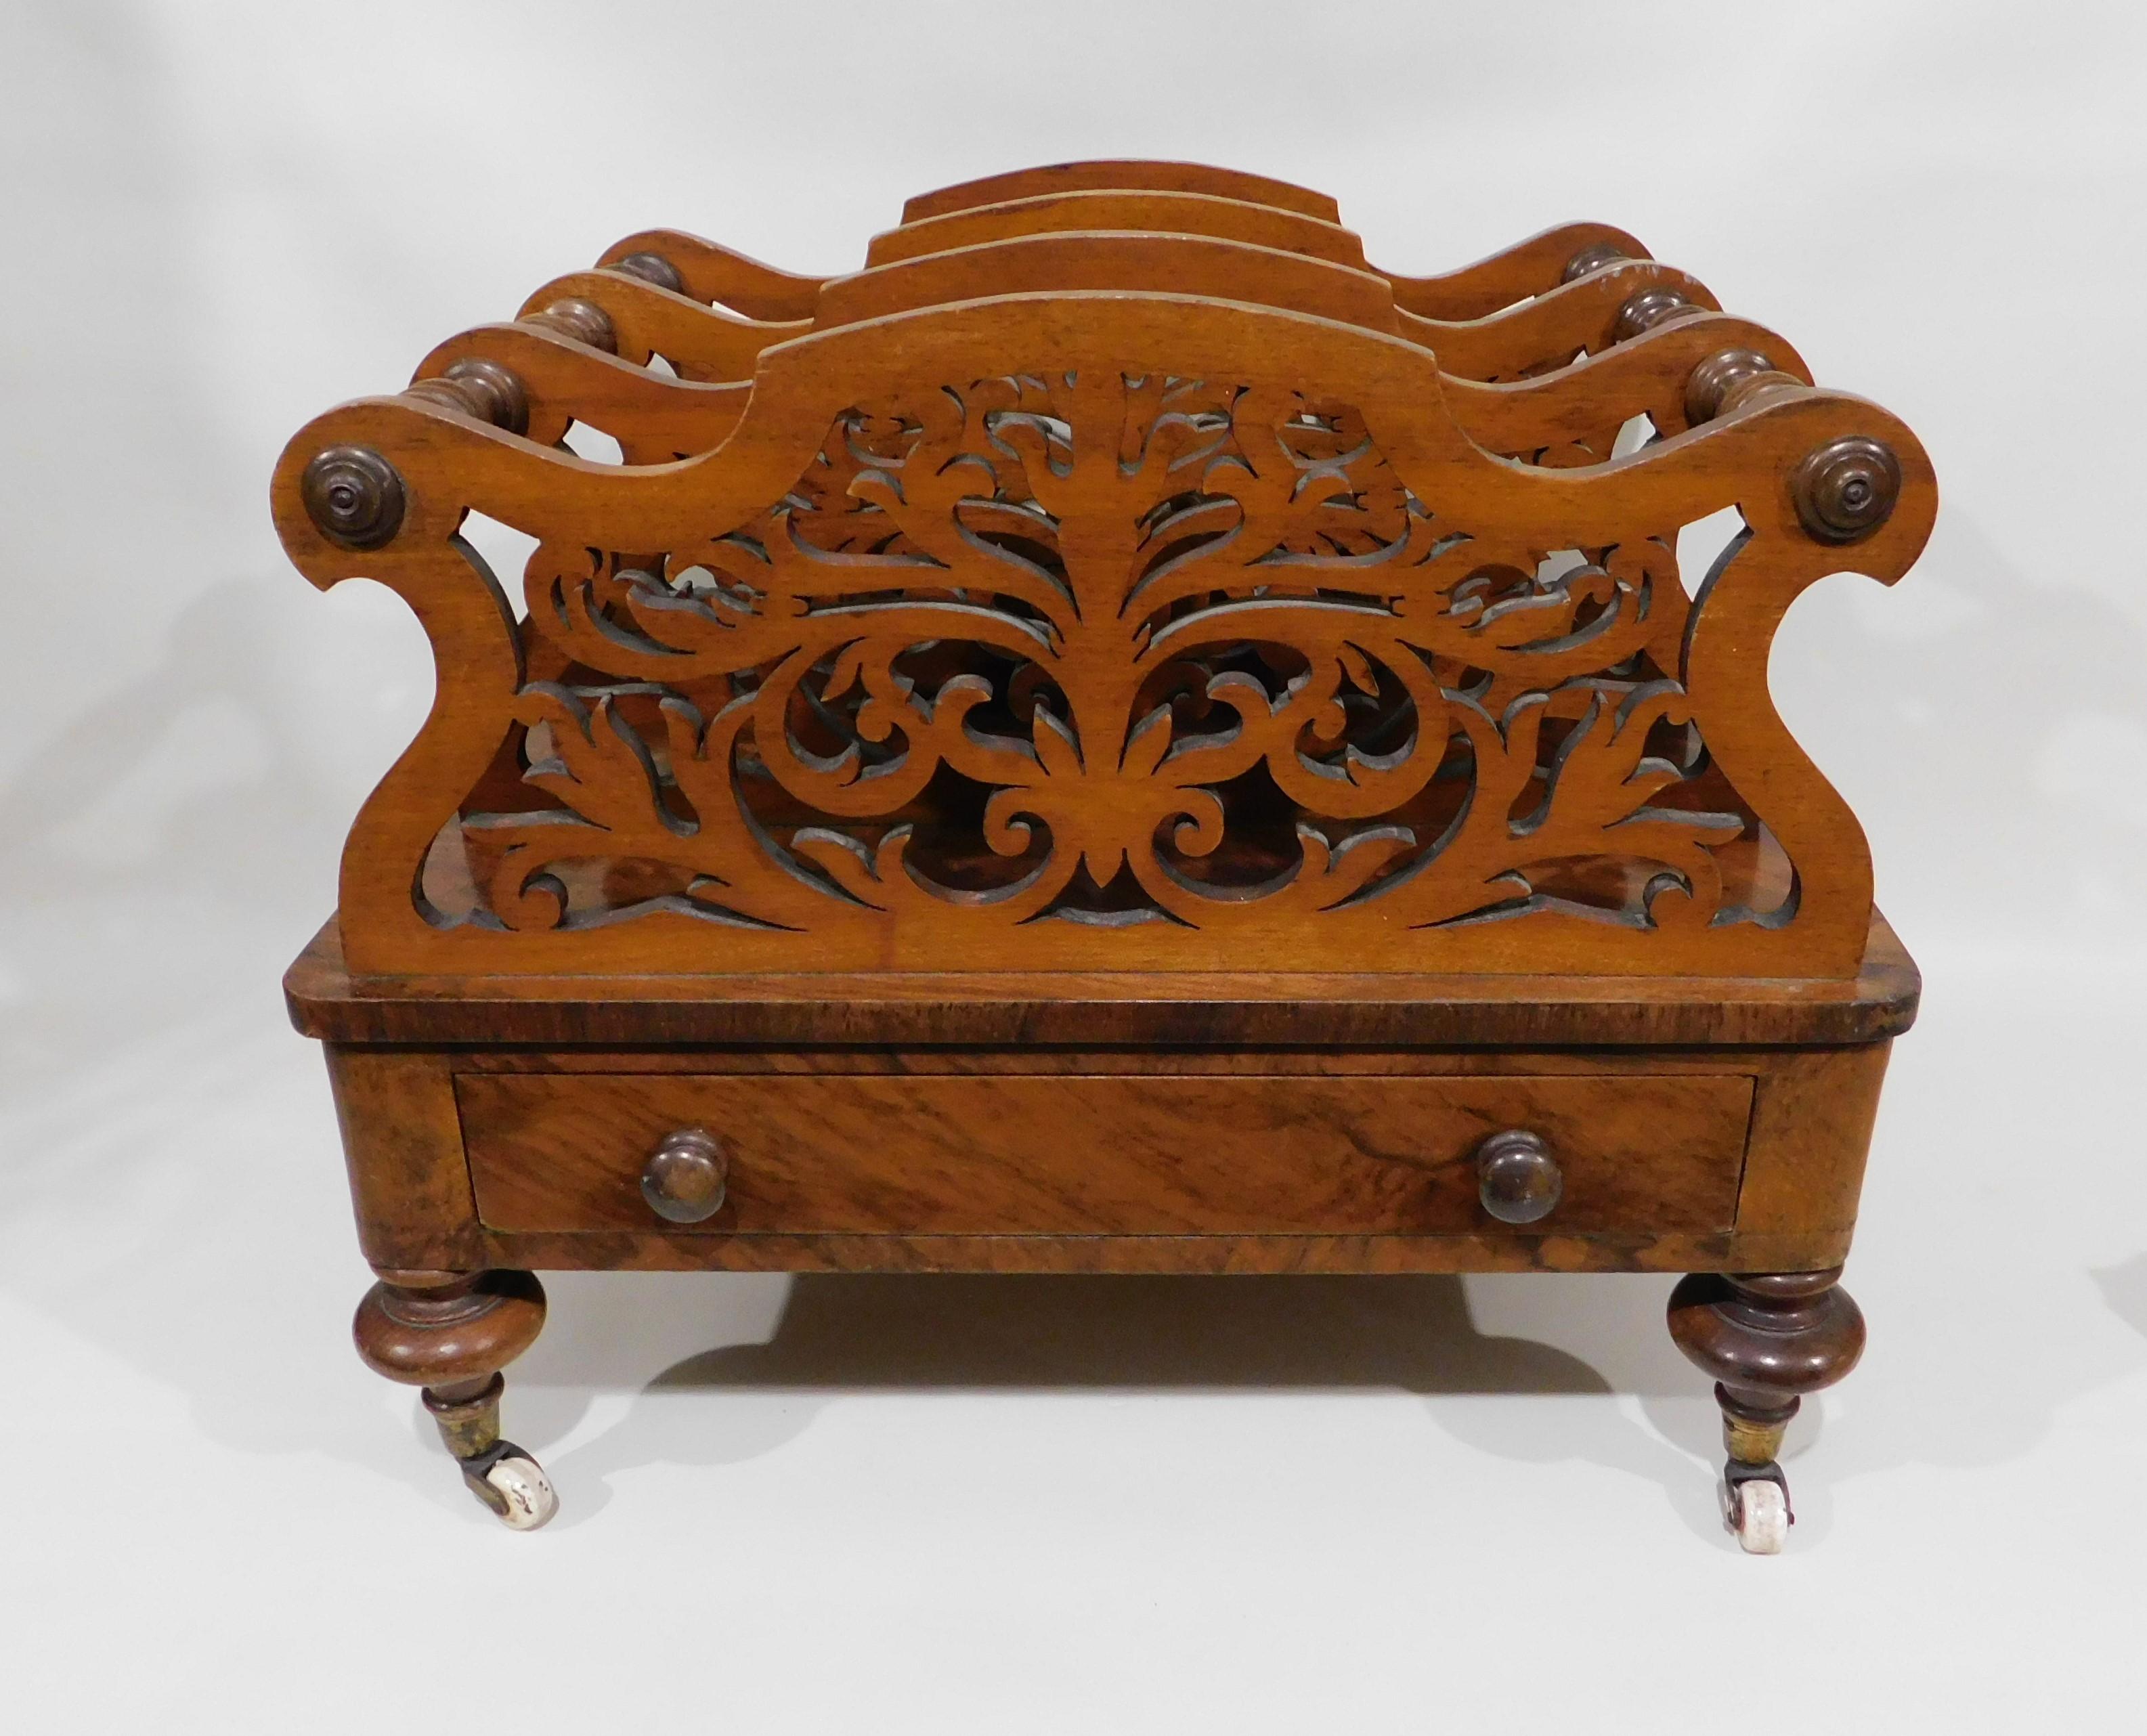 Victorian burled walnut and veneer Canterbury rack to hold sheet music or magazines with one drawer and porcelain ceramic wheels, circa 1840.